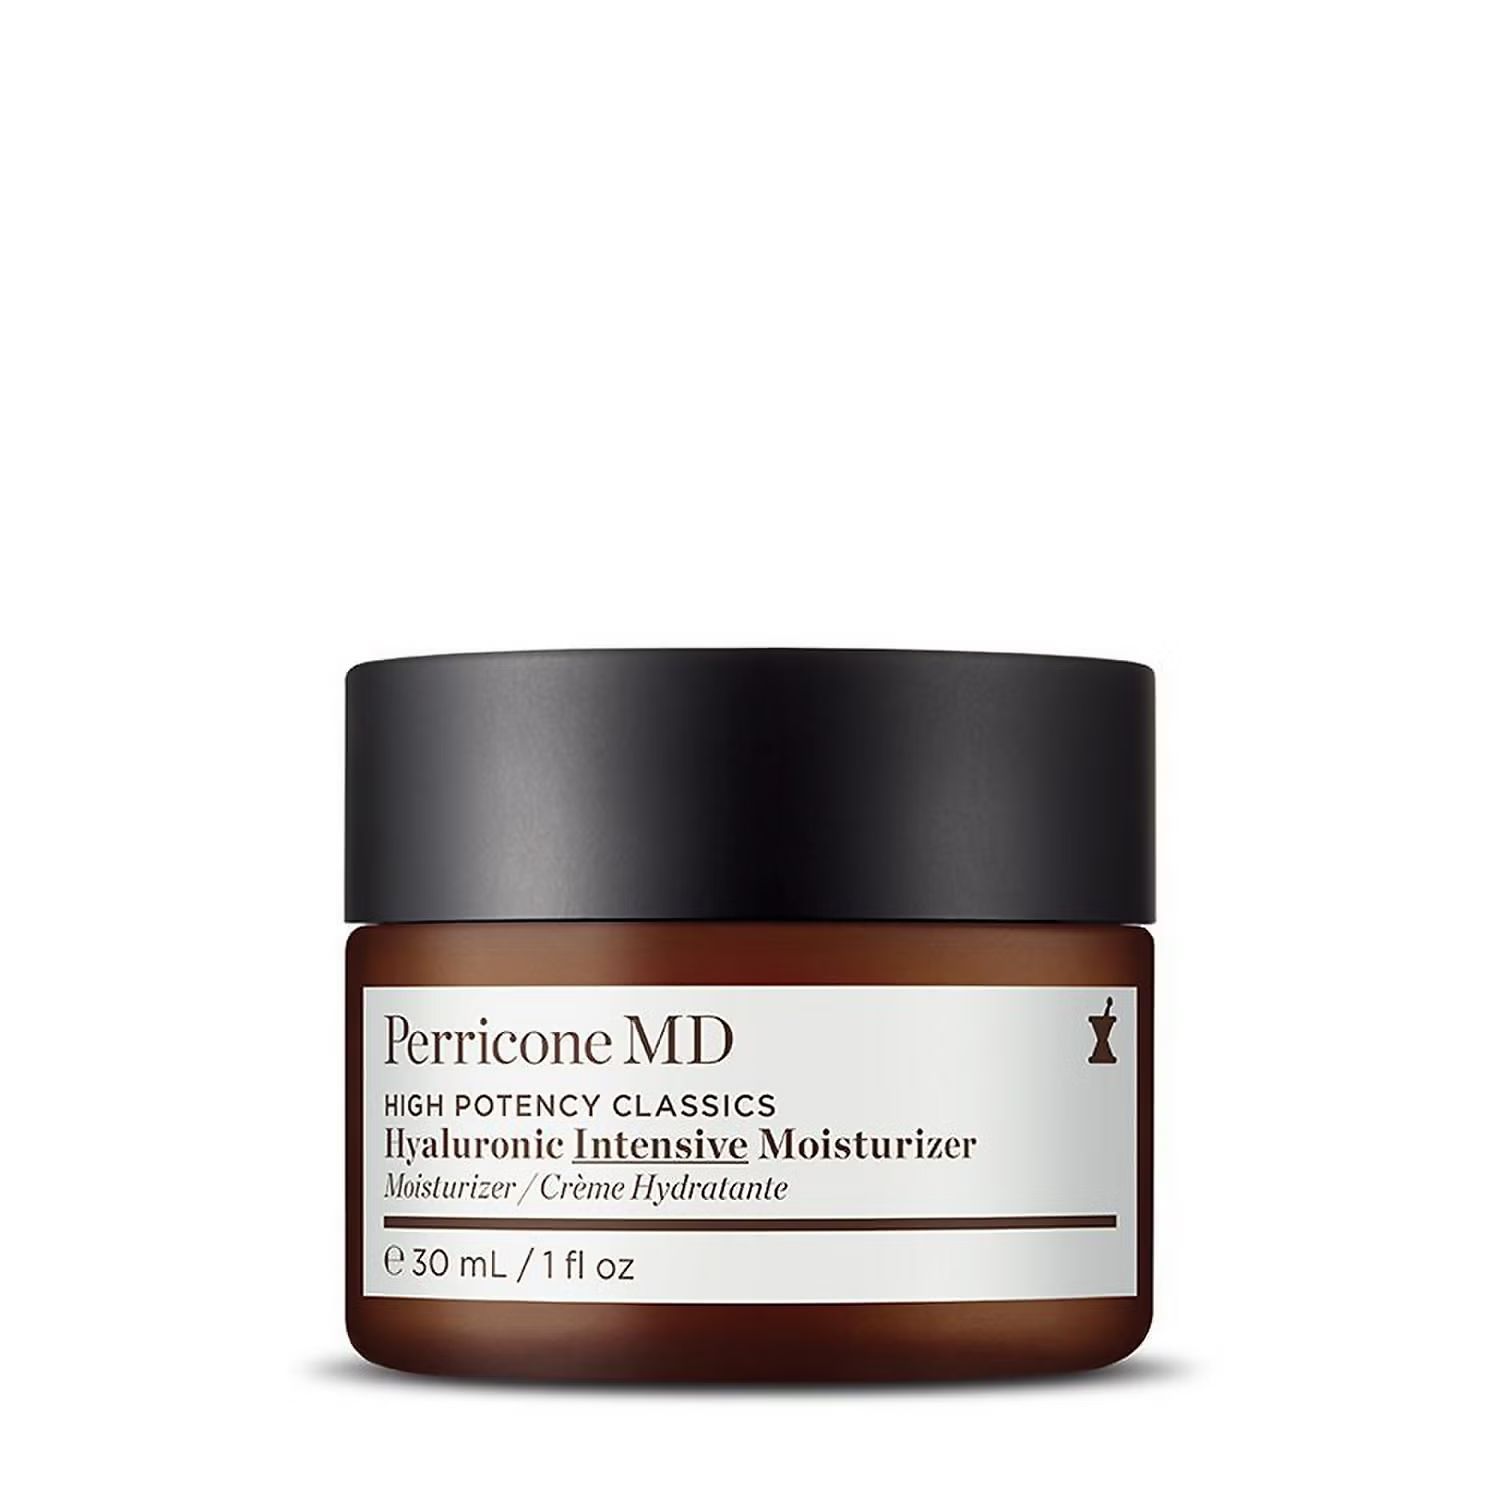 High Potency Classics Hyaluronic Intensive Moisturizer | PerriconeMD US